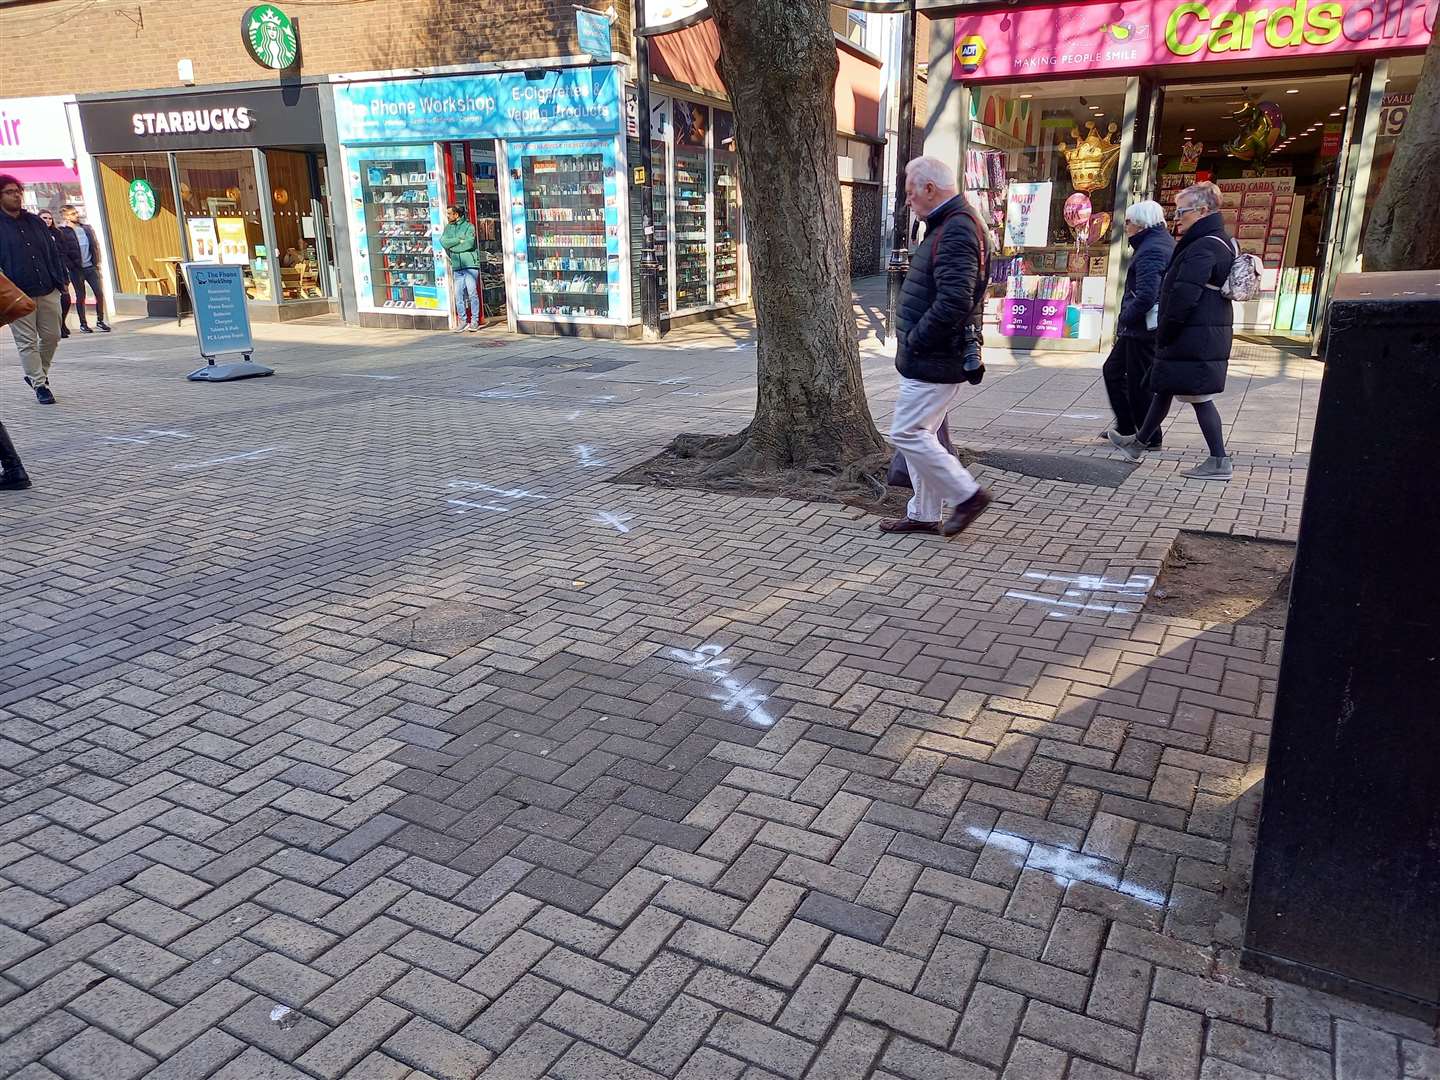 White markings have been sprayed across the high street pavement